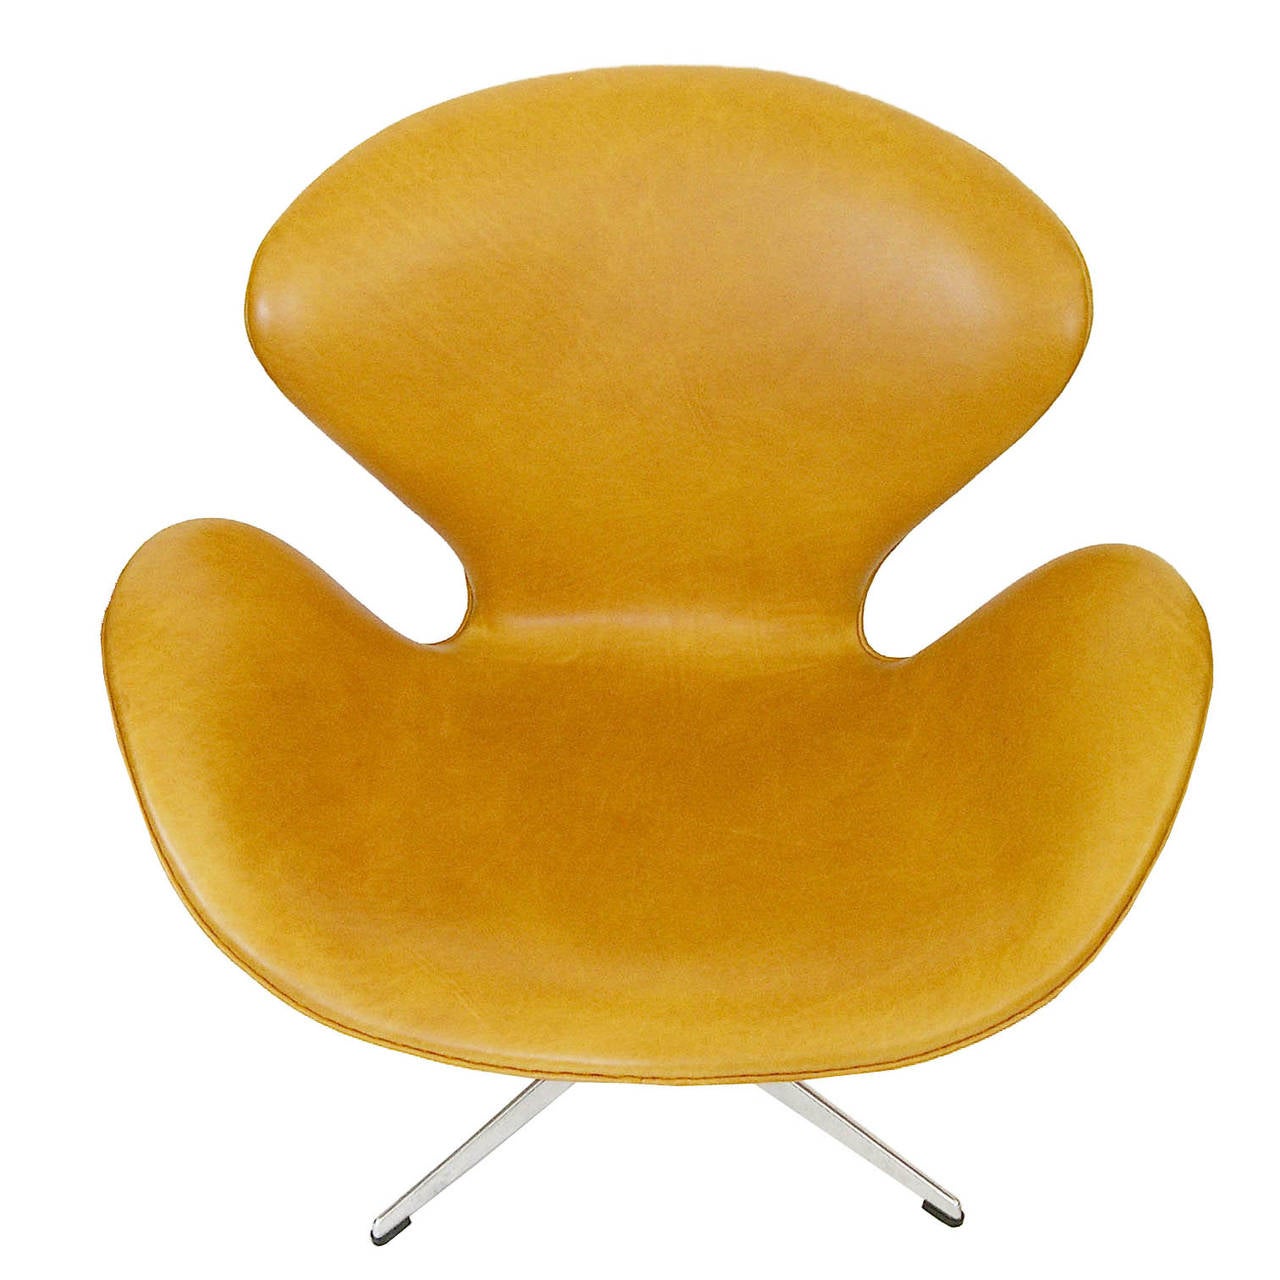 Anodized Early Rare Adjustable Swan Chair by Arne Jacobsen in Saddle Tan Leather